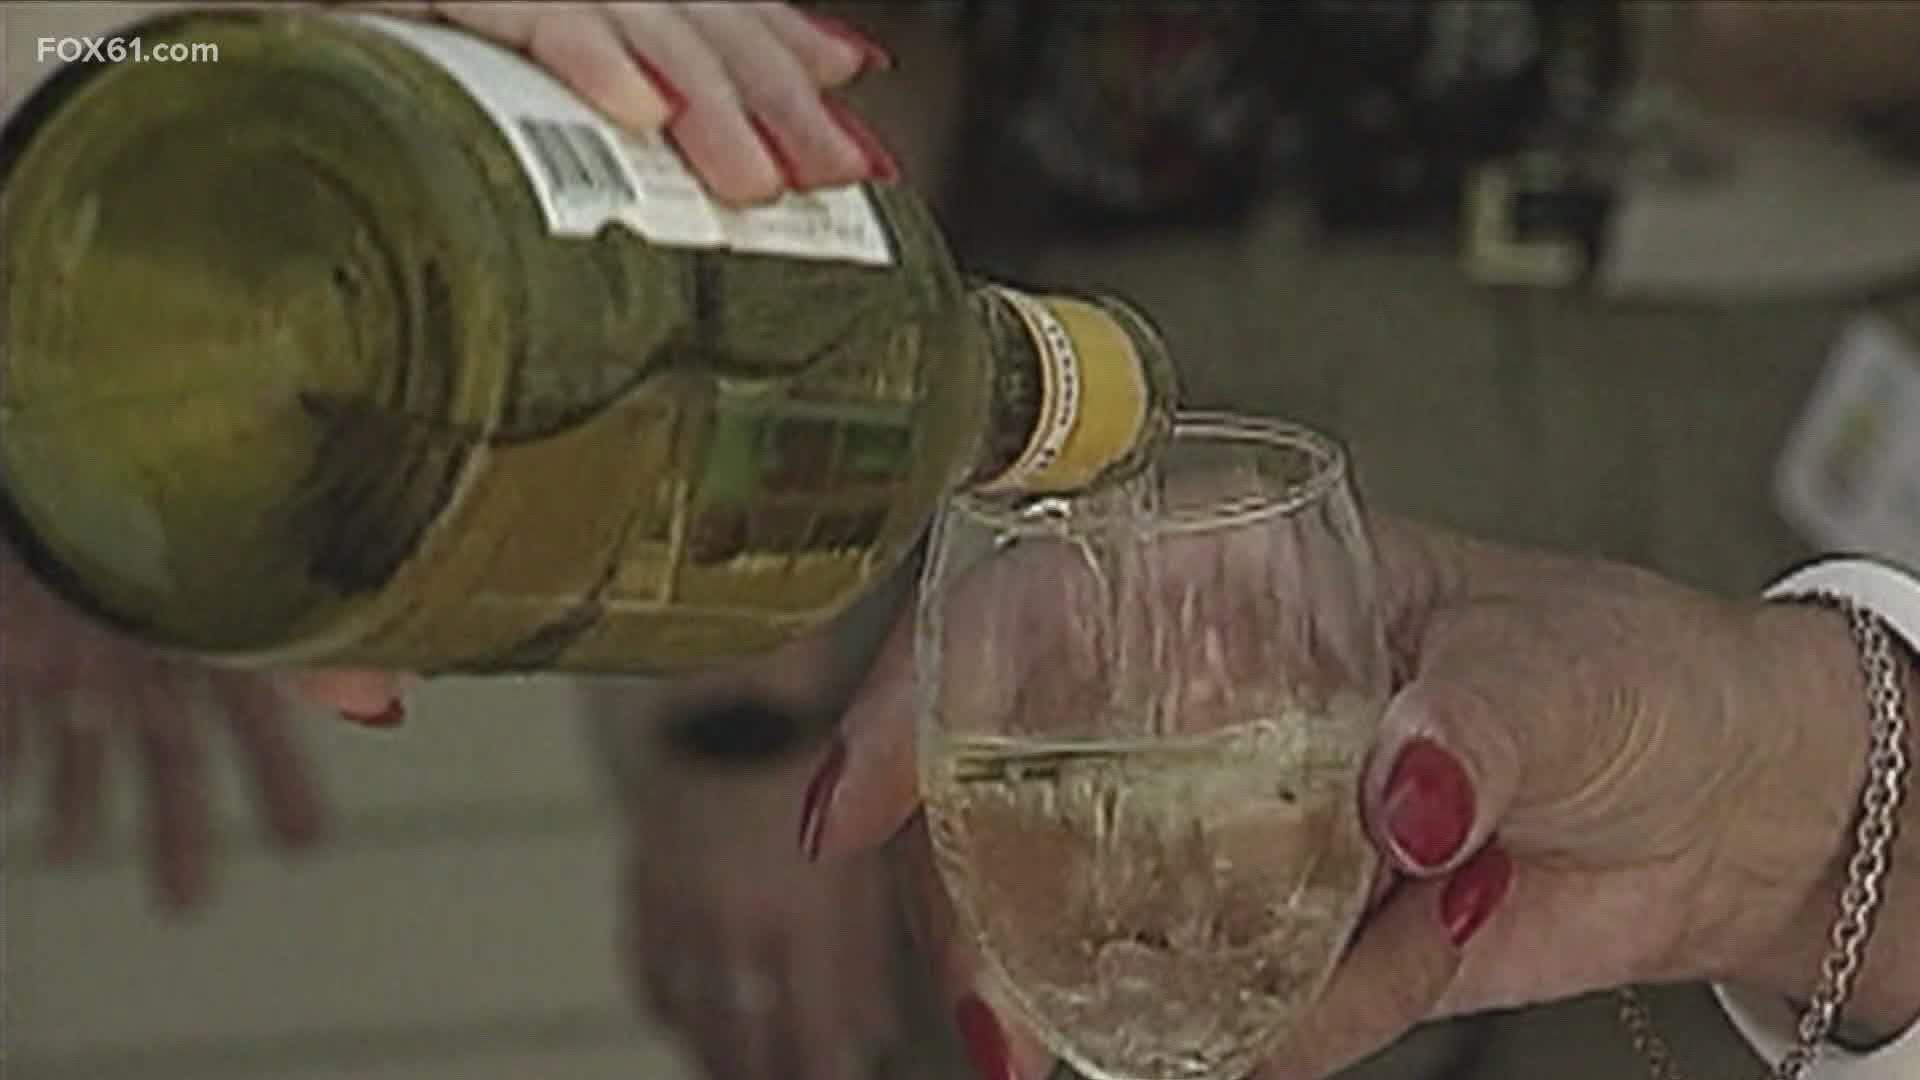 Not only has underage drinking increased over the last year, but it's now easier to get.